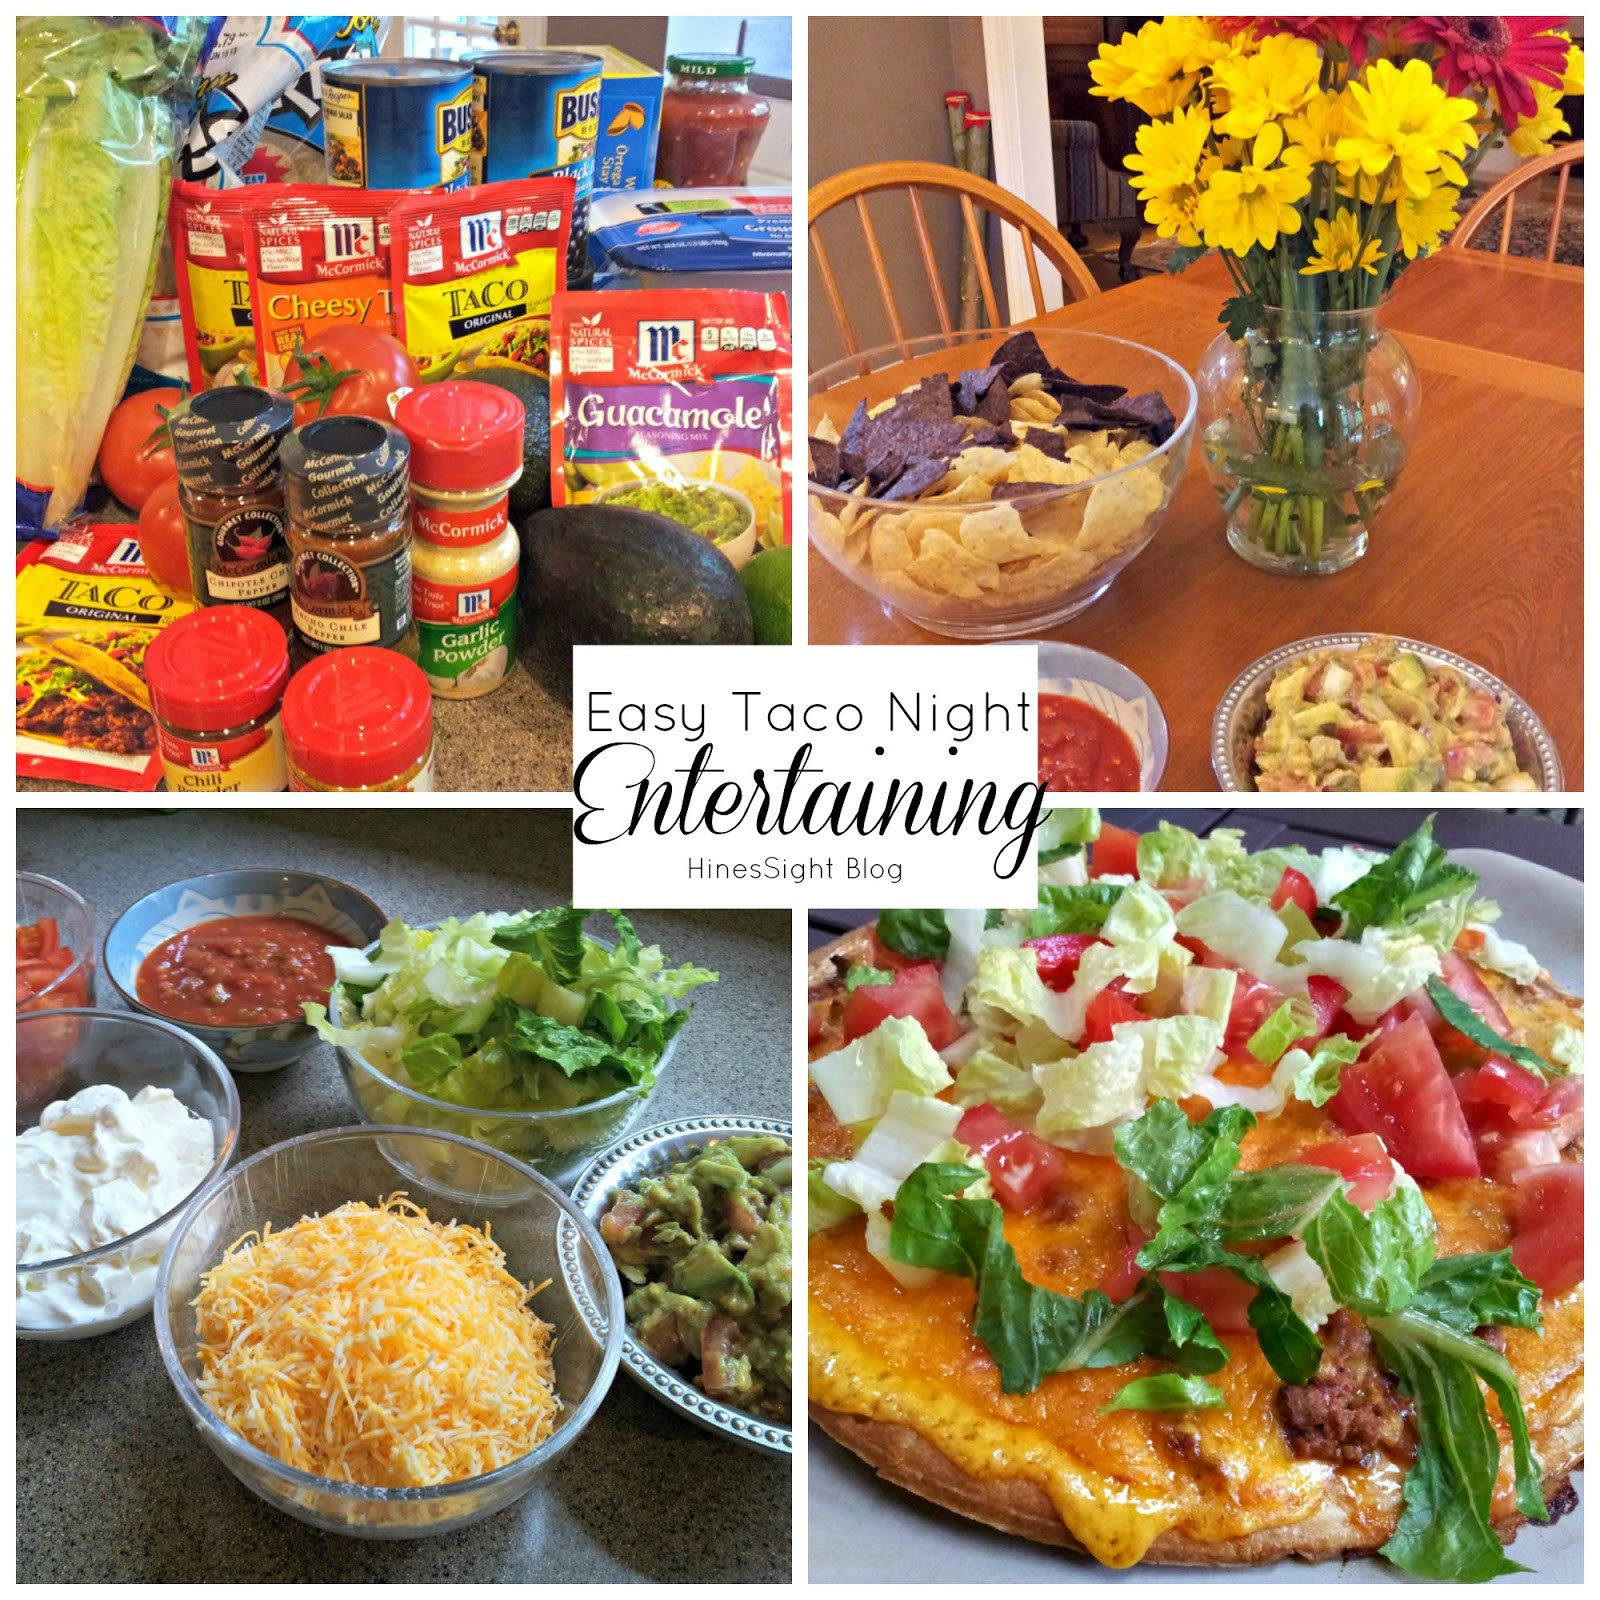 Taco Dinner Party Ideas
 Hines Sight Blog Make it a Simple Taco Themed Dinner